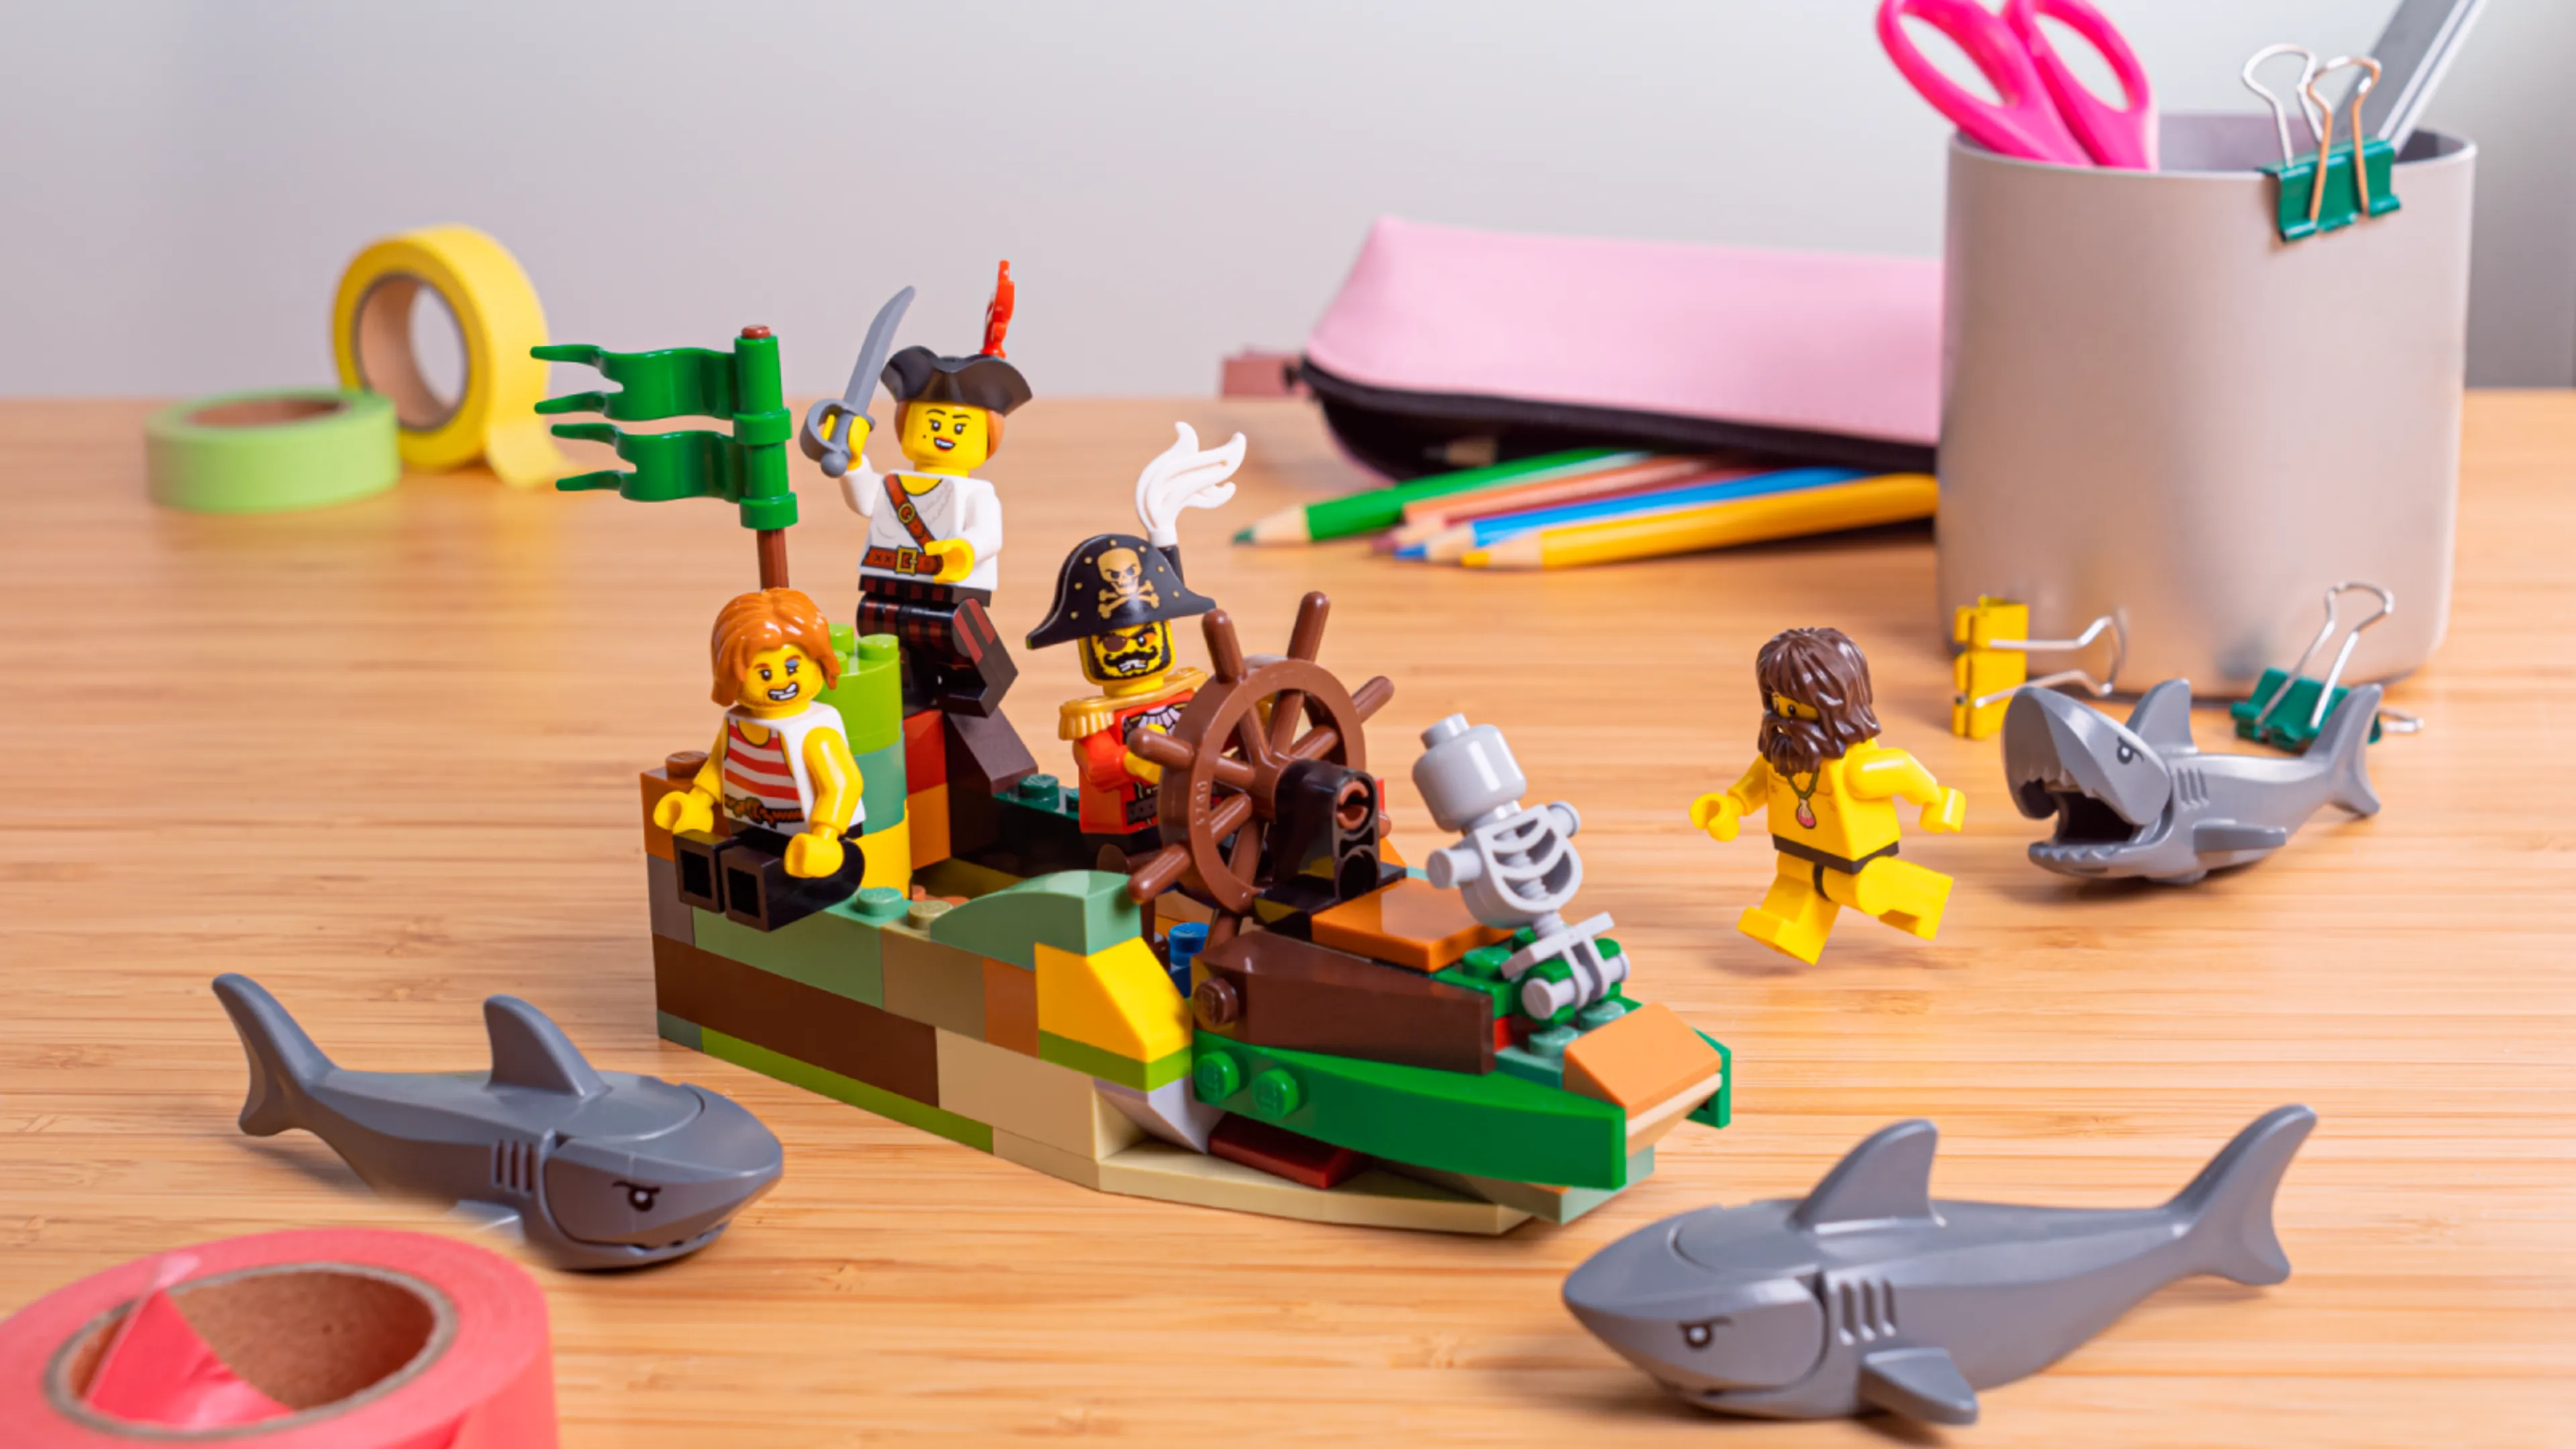 Minifigures on a ship, escaping from sharks